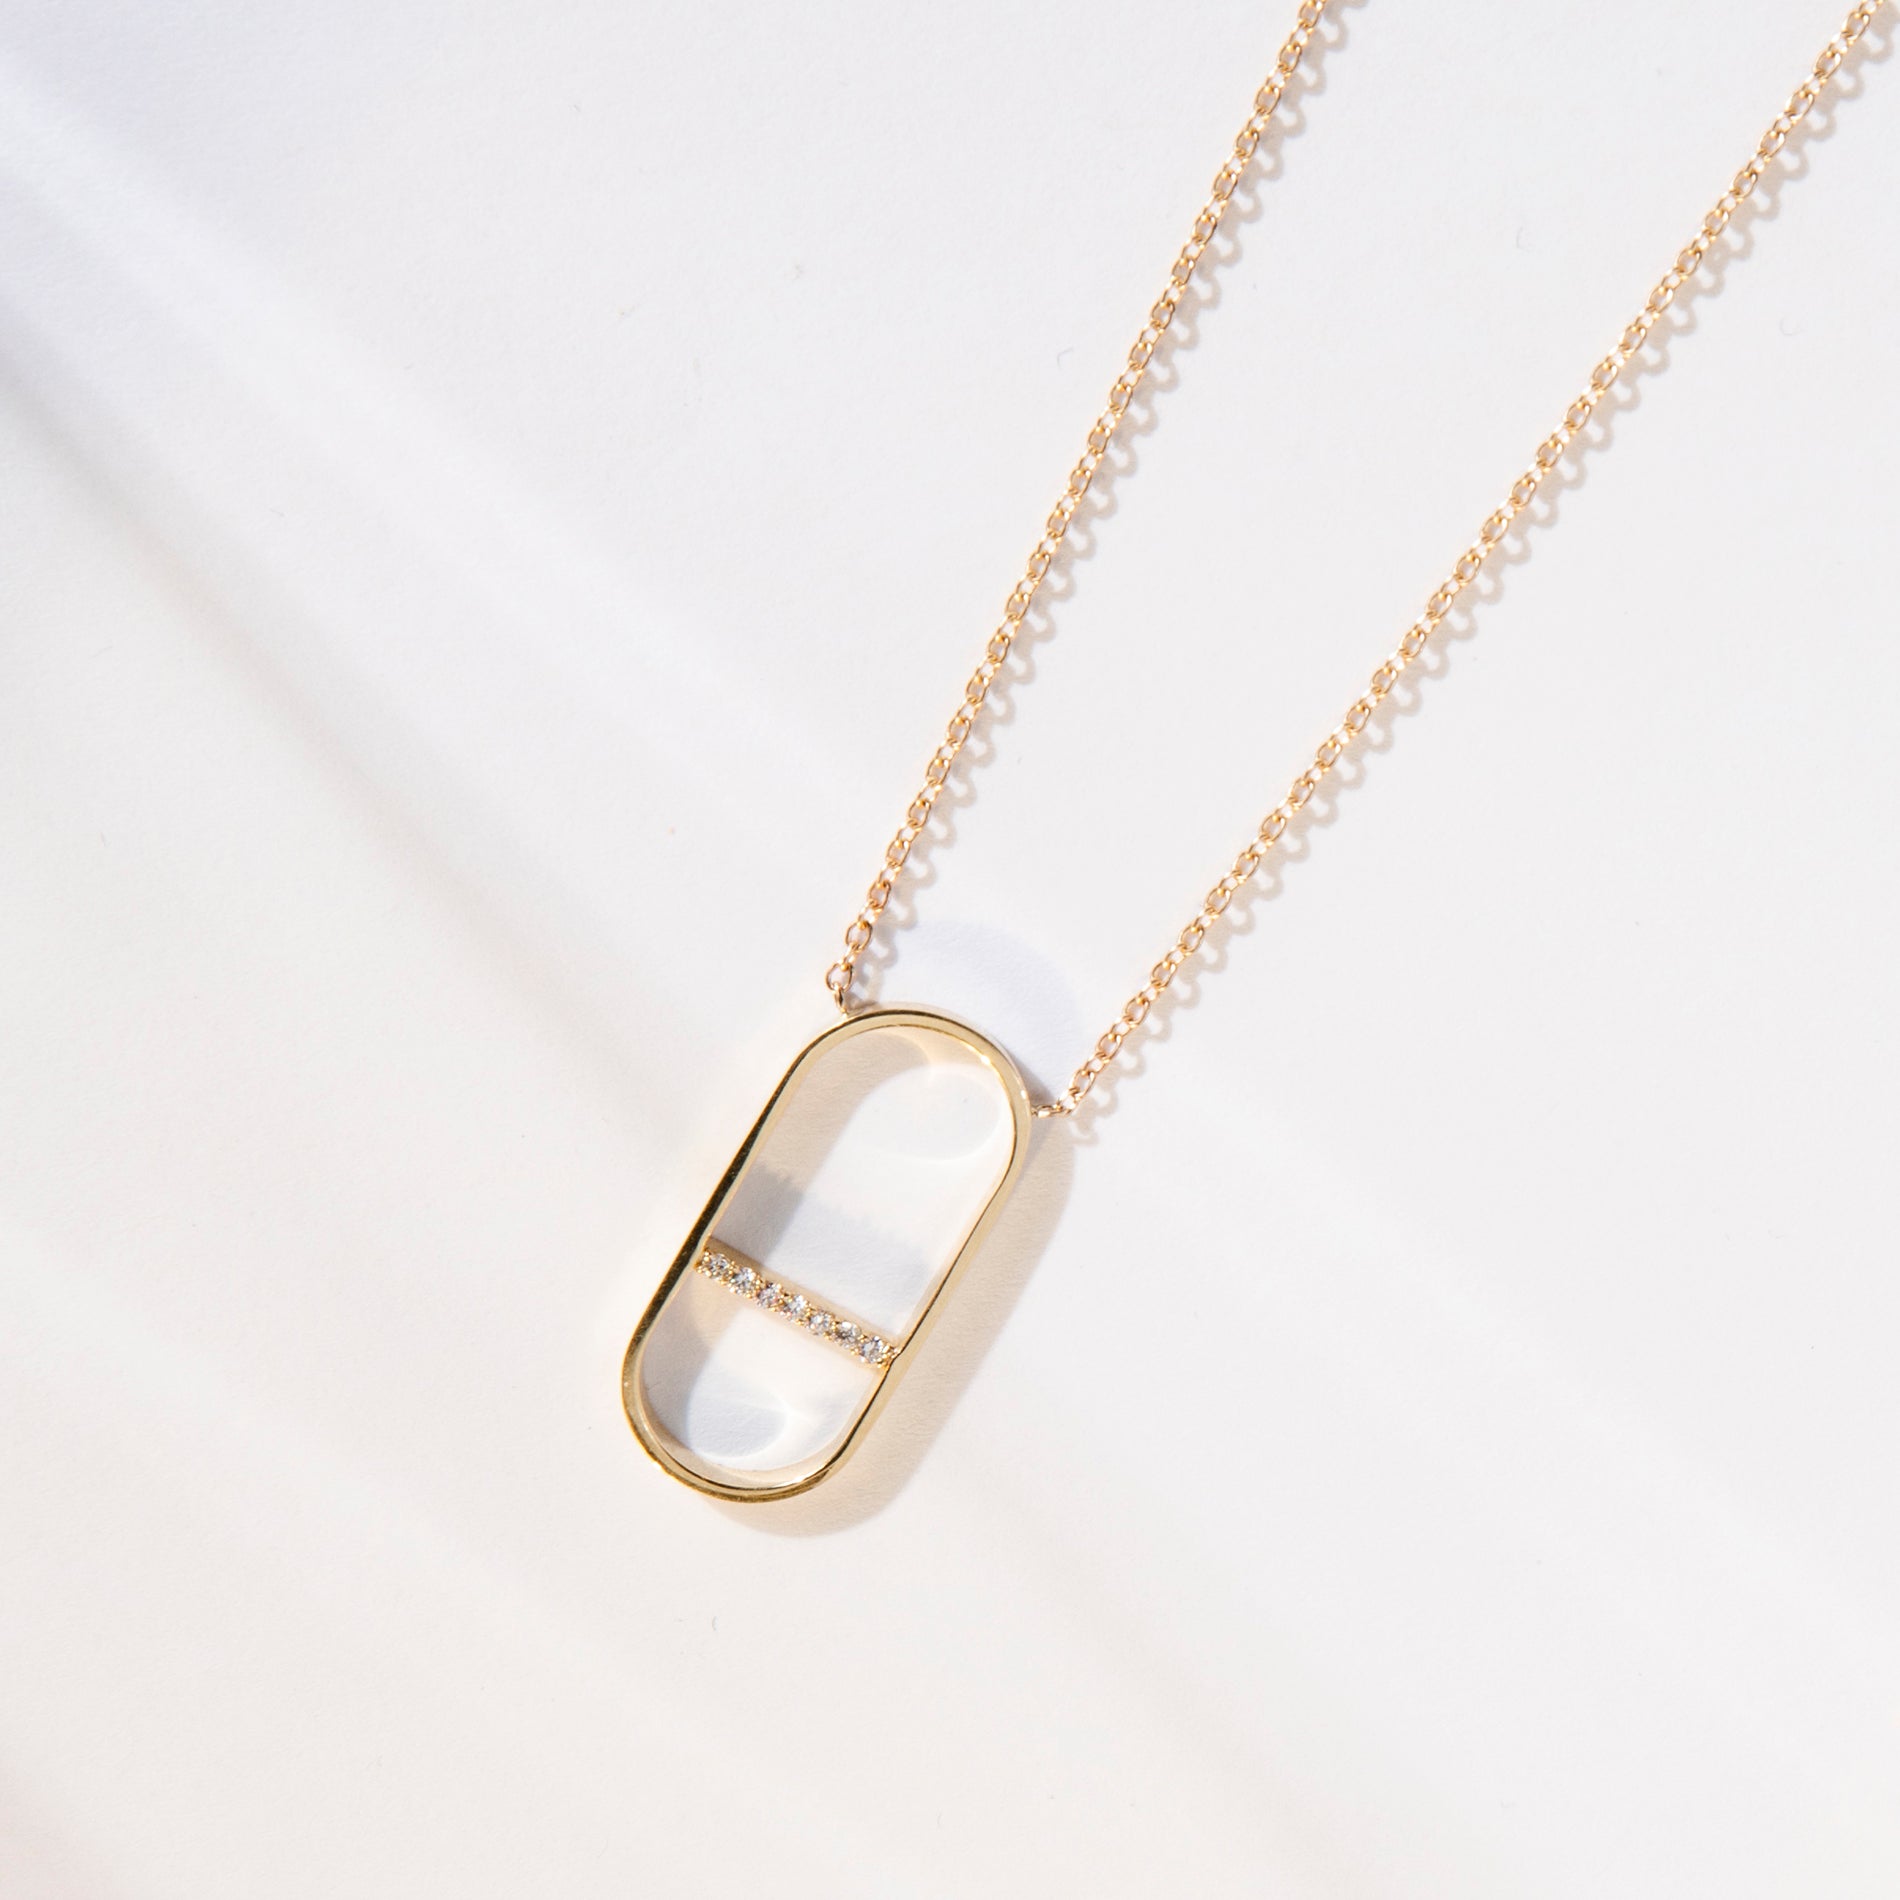 Rongo Designer Necklace in 14k Gold set with White Diamonds By SHW Fine Jewelry NYC